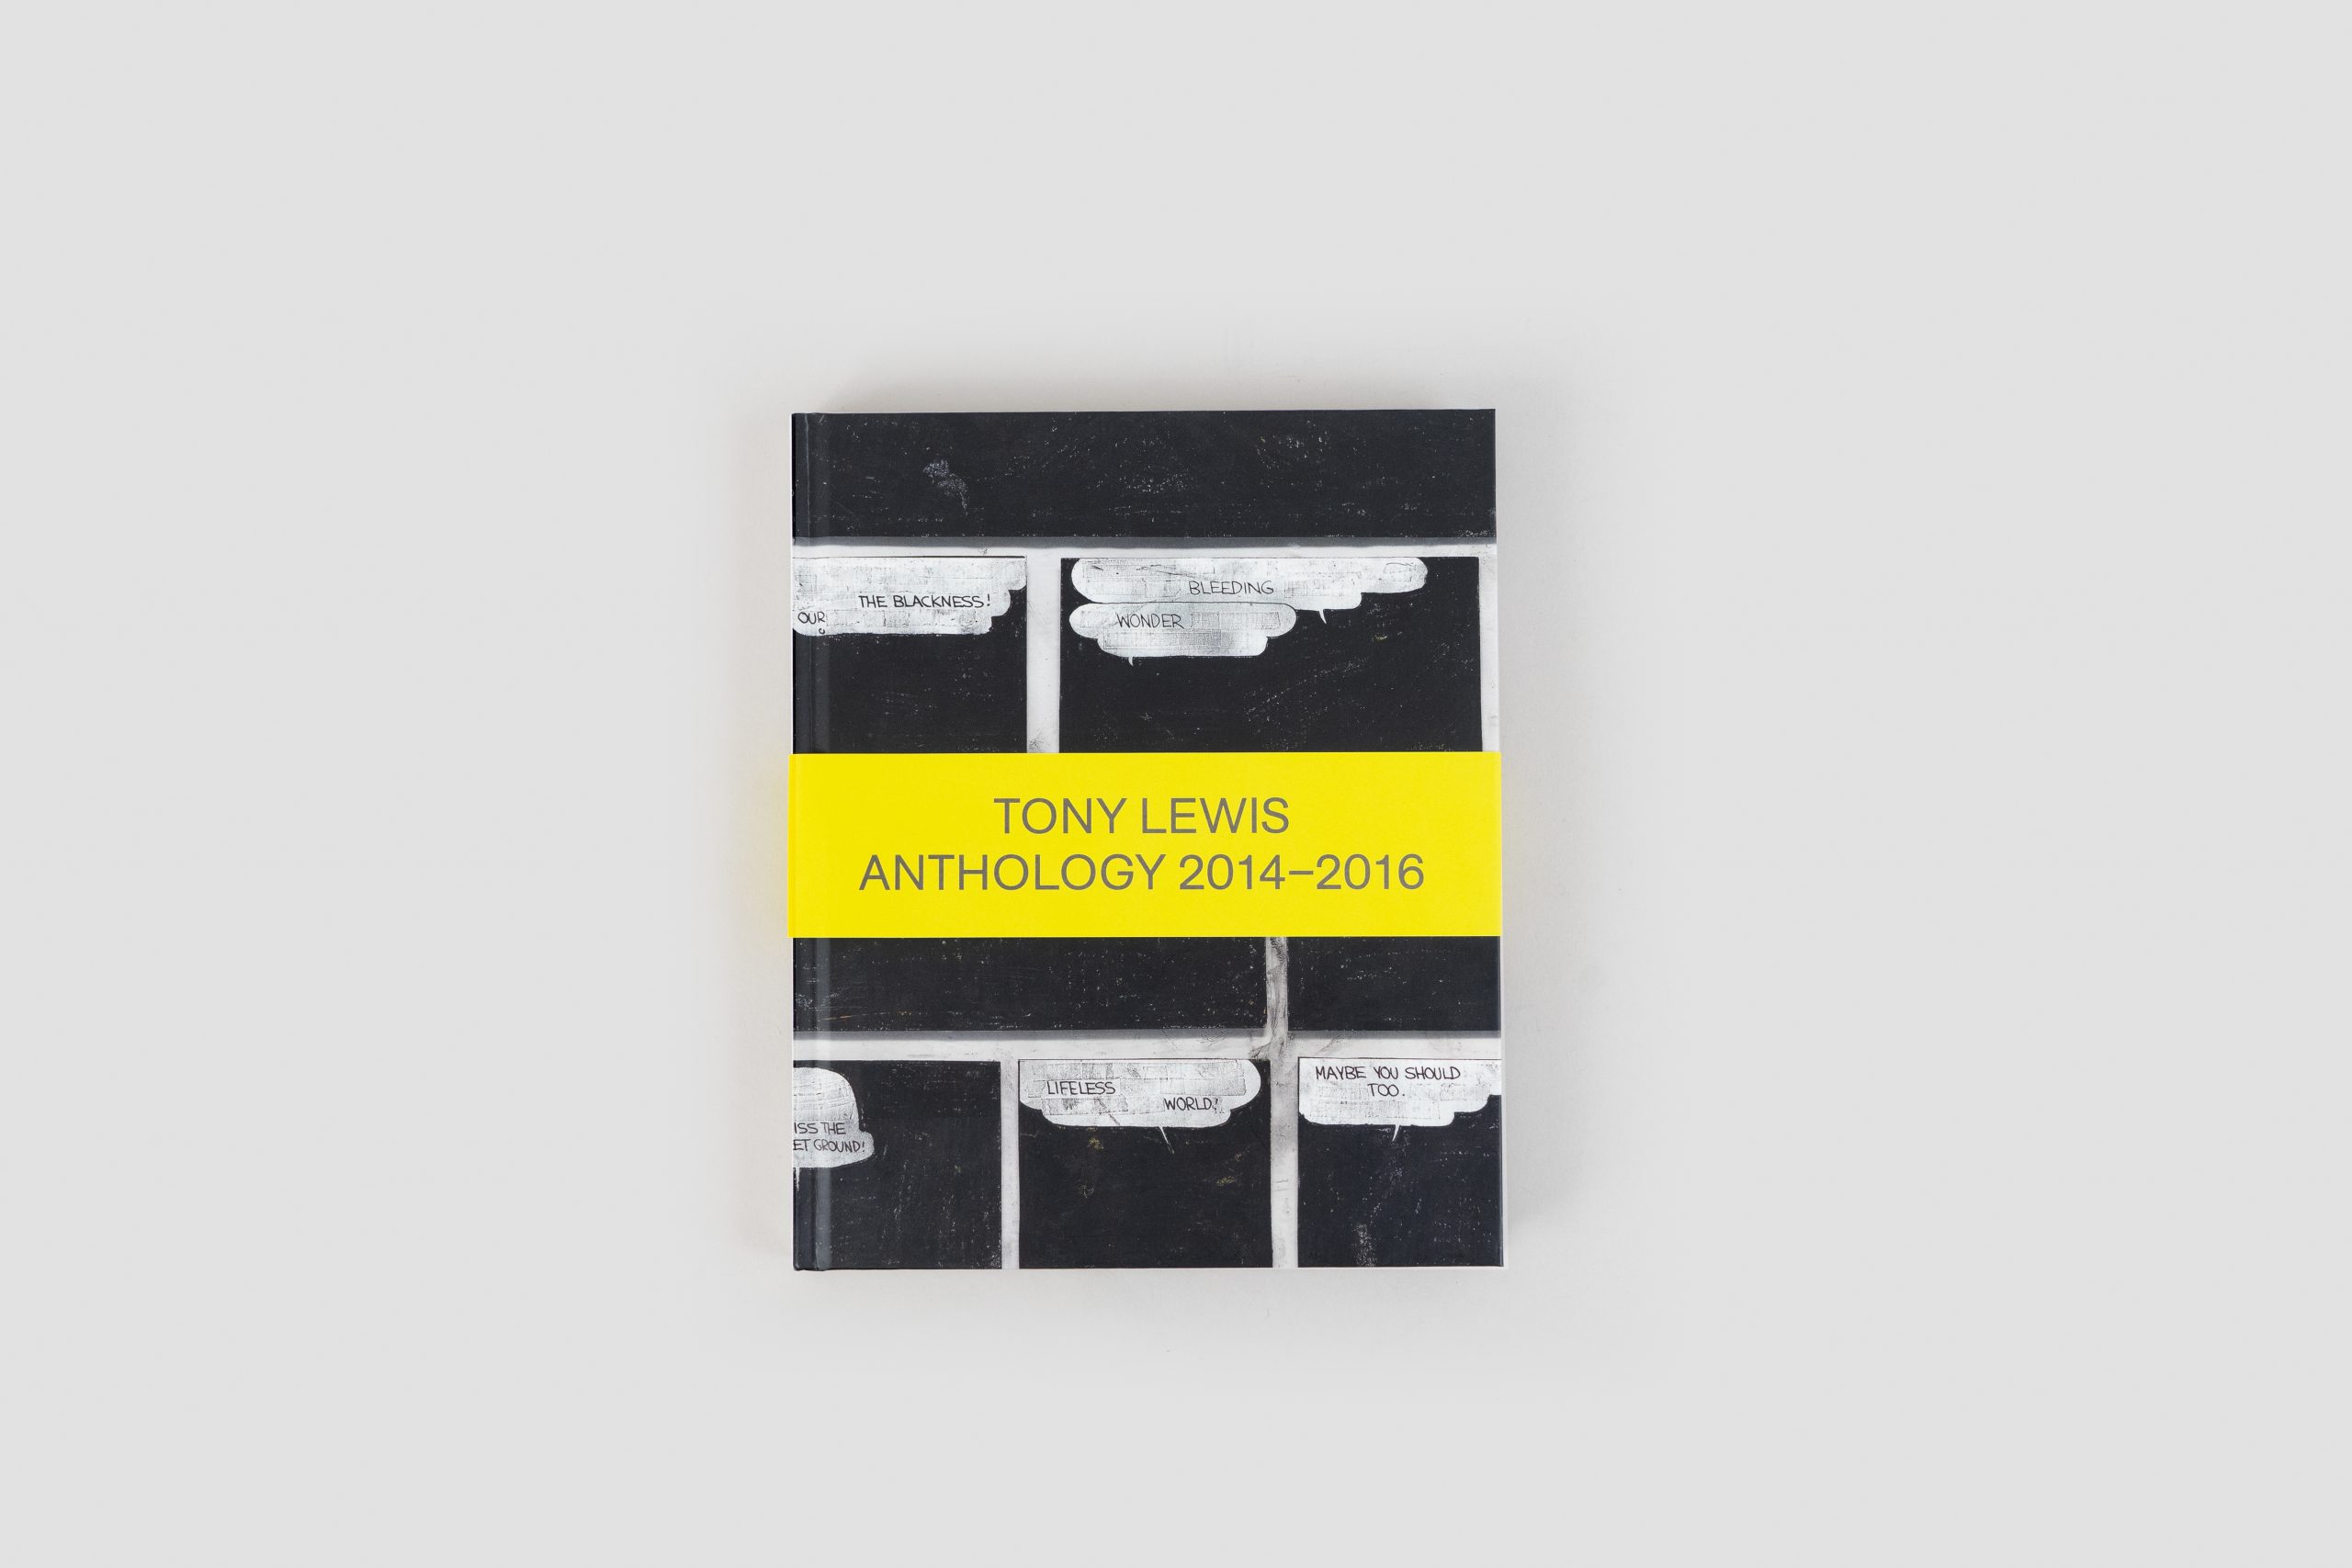 Cover of catalogue. Reads "Tony Lewis: Anthology 2014-2016"